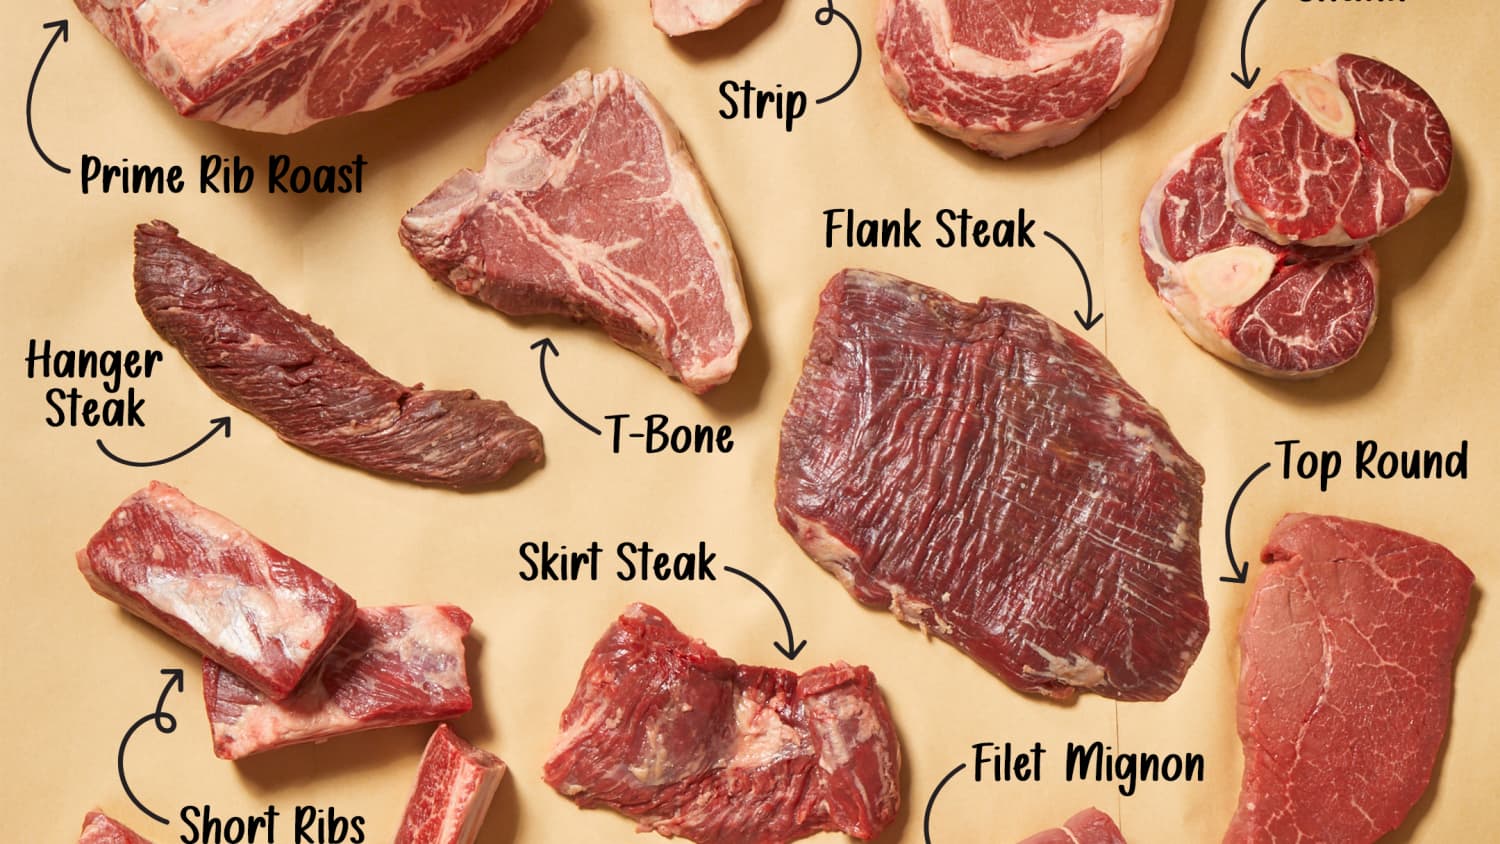 Guide to Different Cuts of Beef - What Molly Made